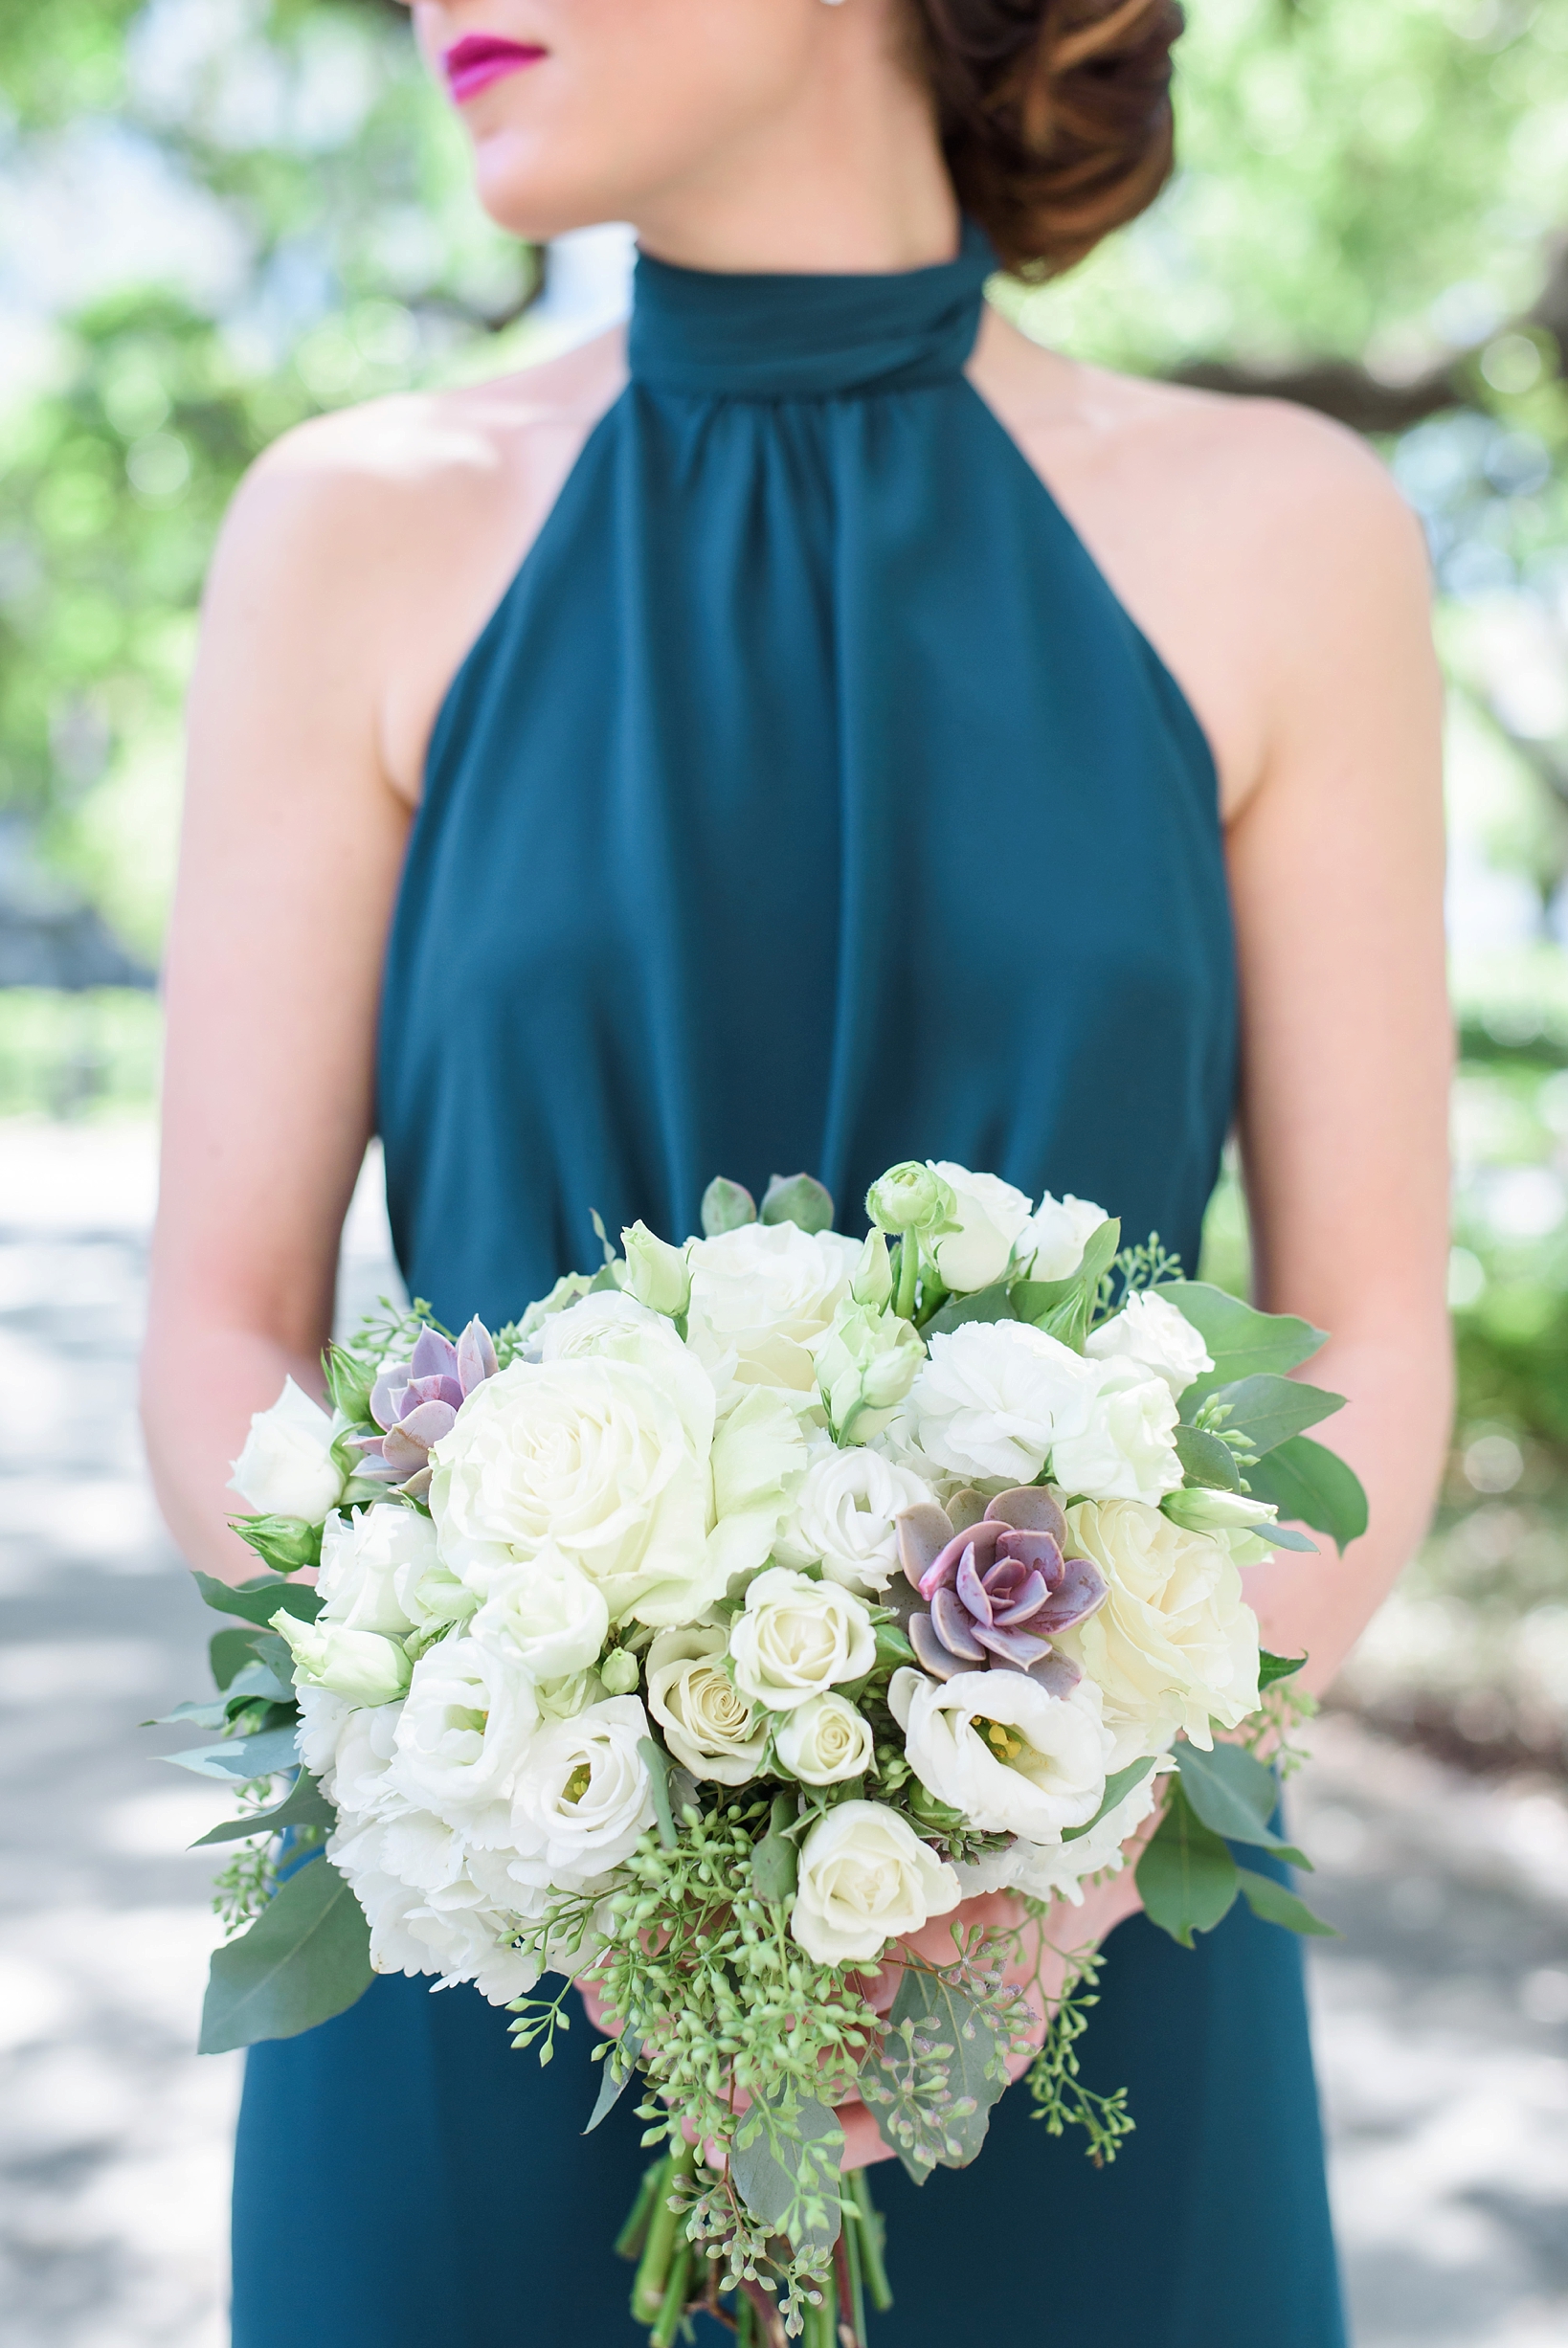 Bridesmaid in teal dress holding her floral filled bouquet